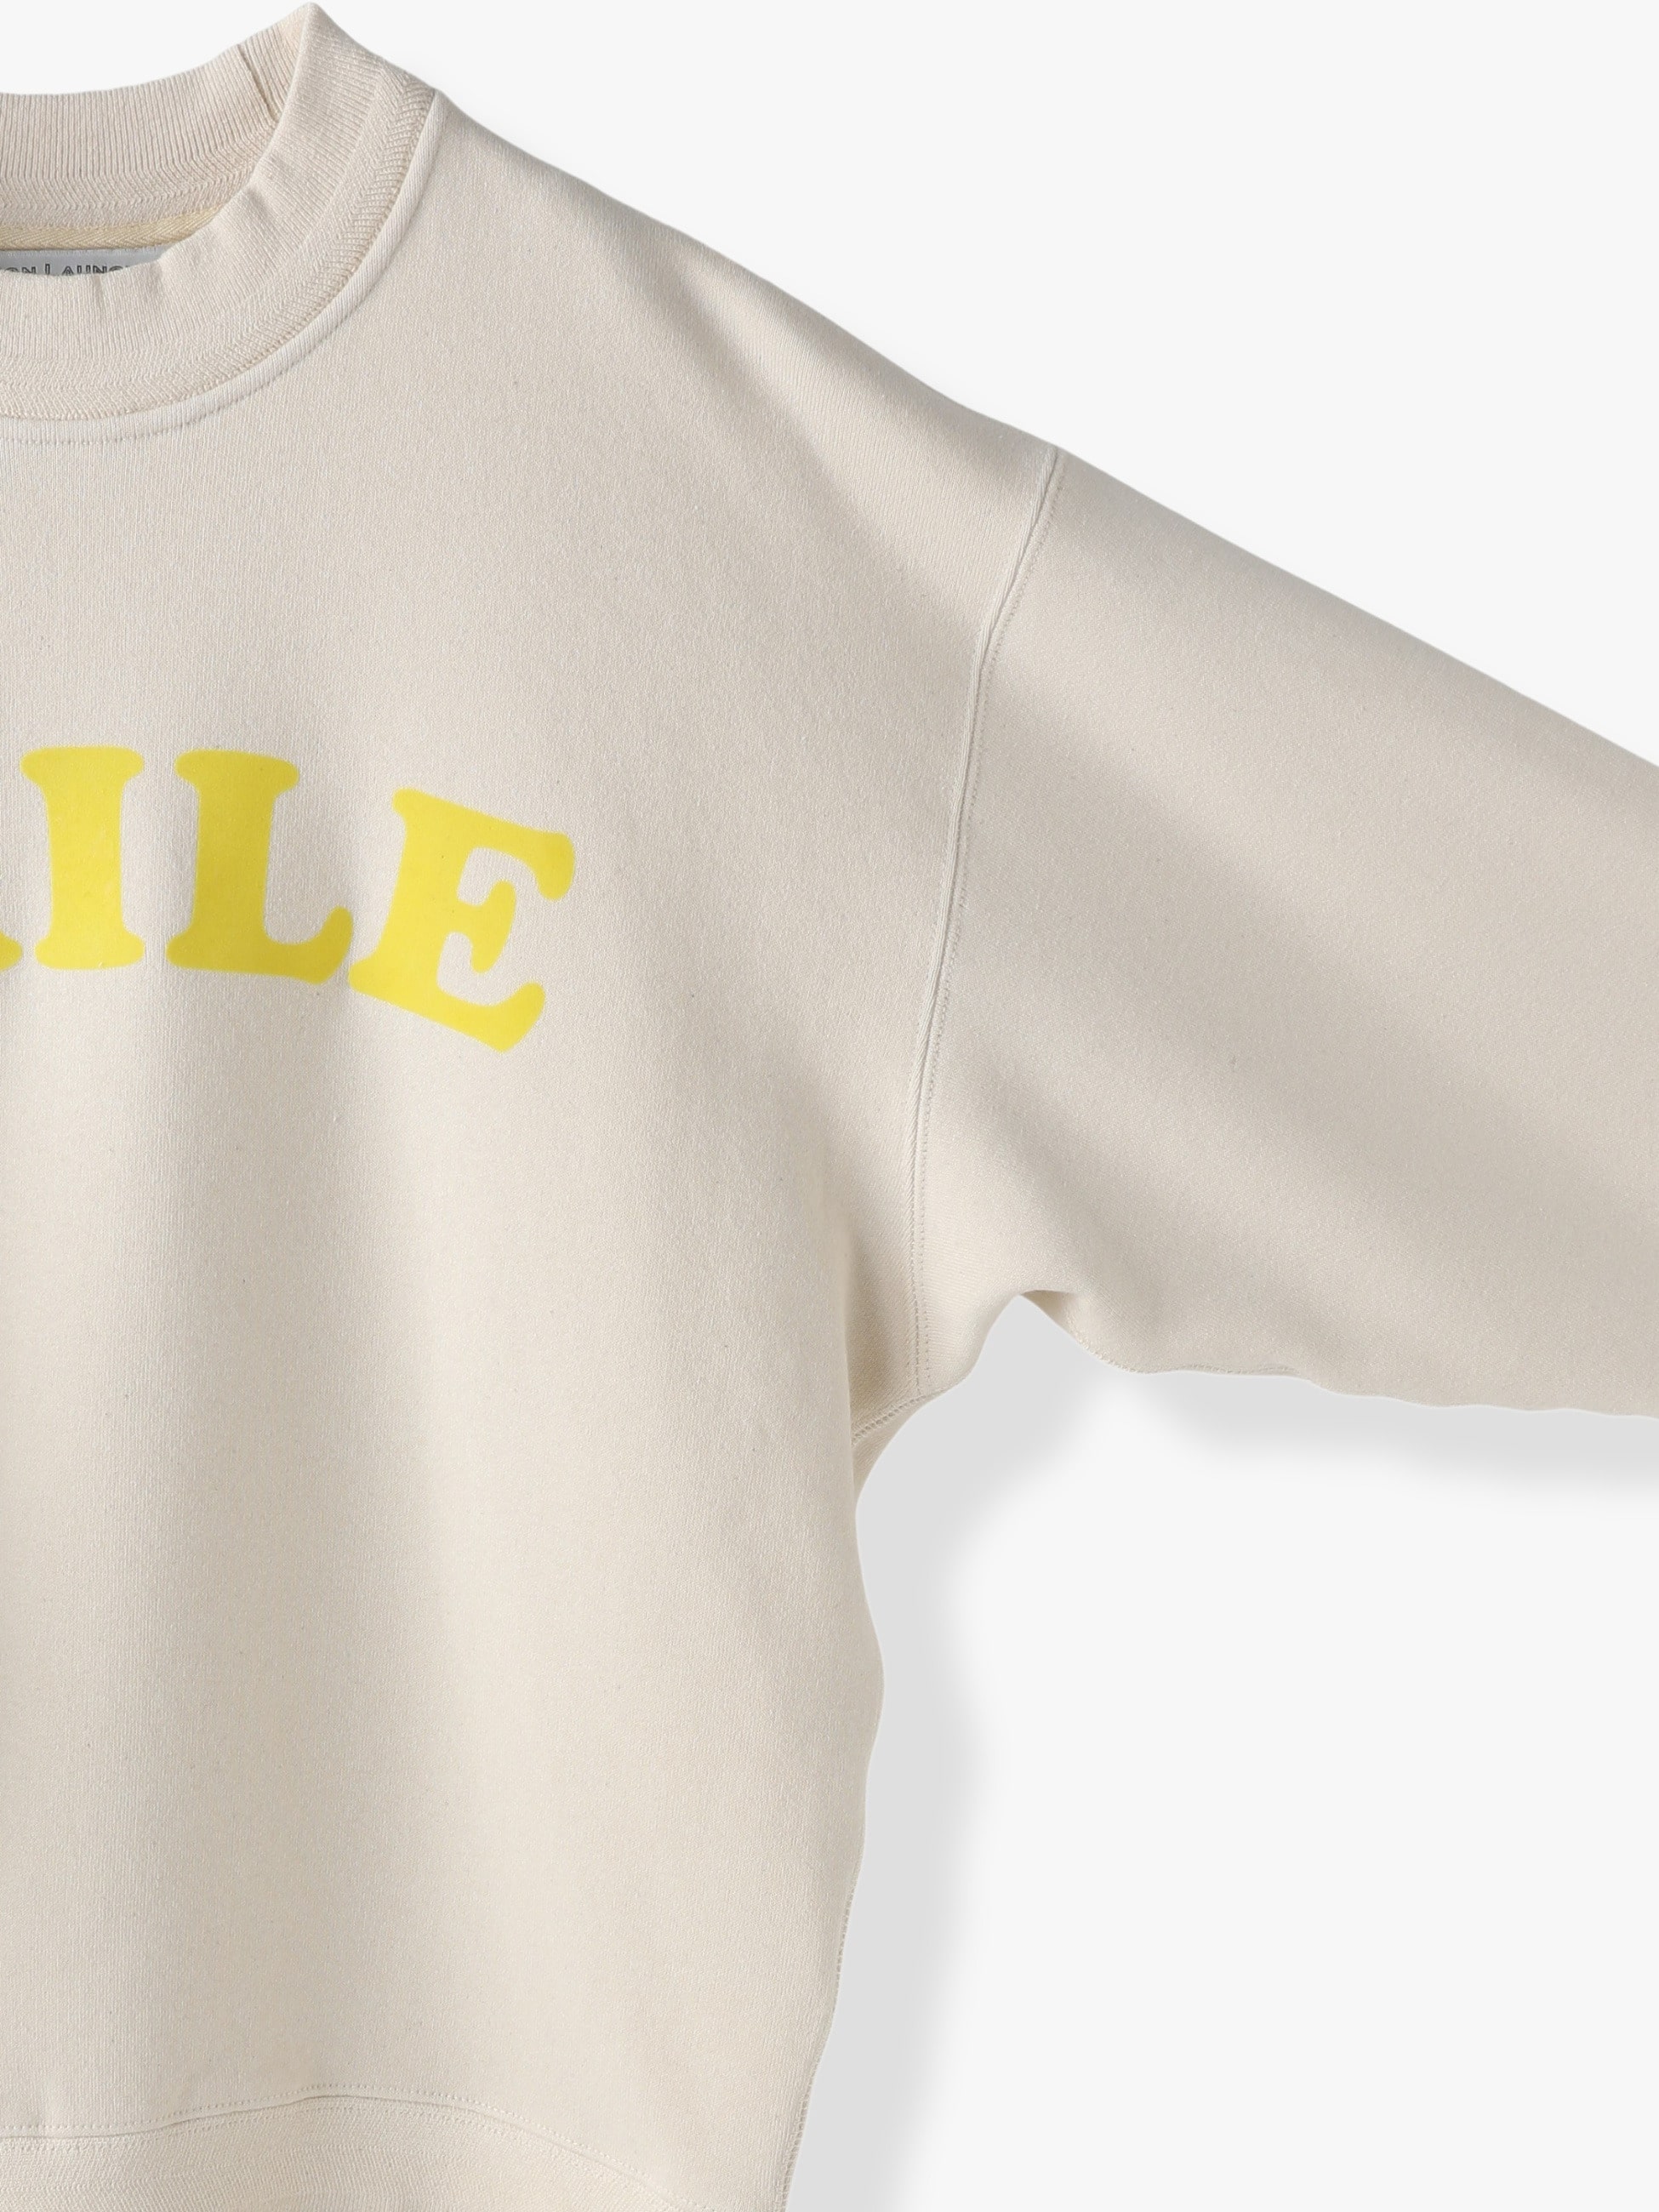 Smile Printed Sweat Pullover